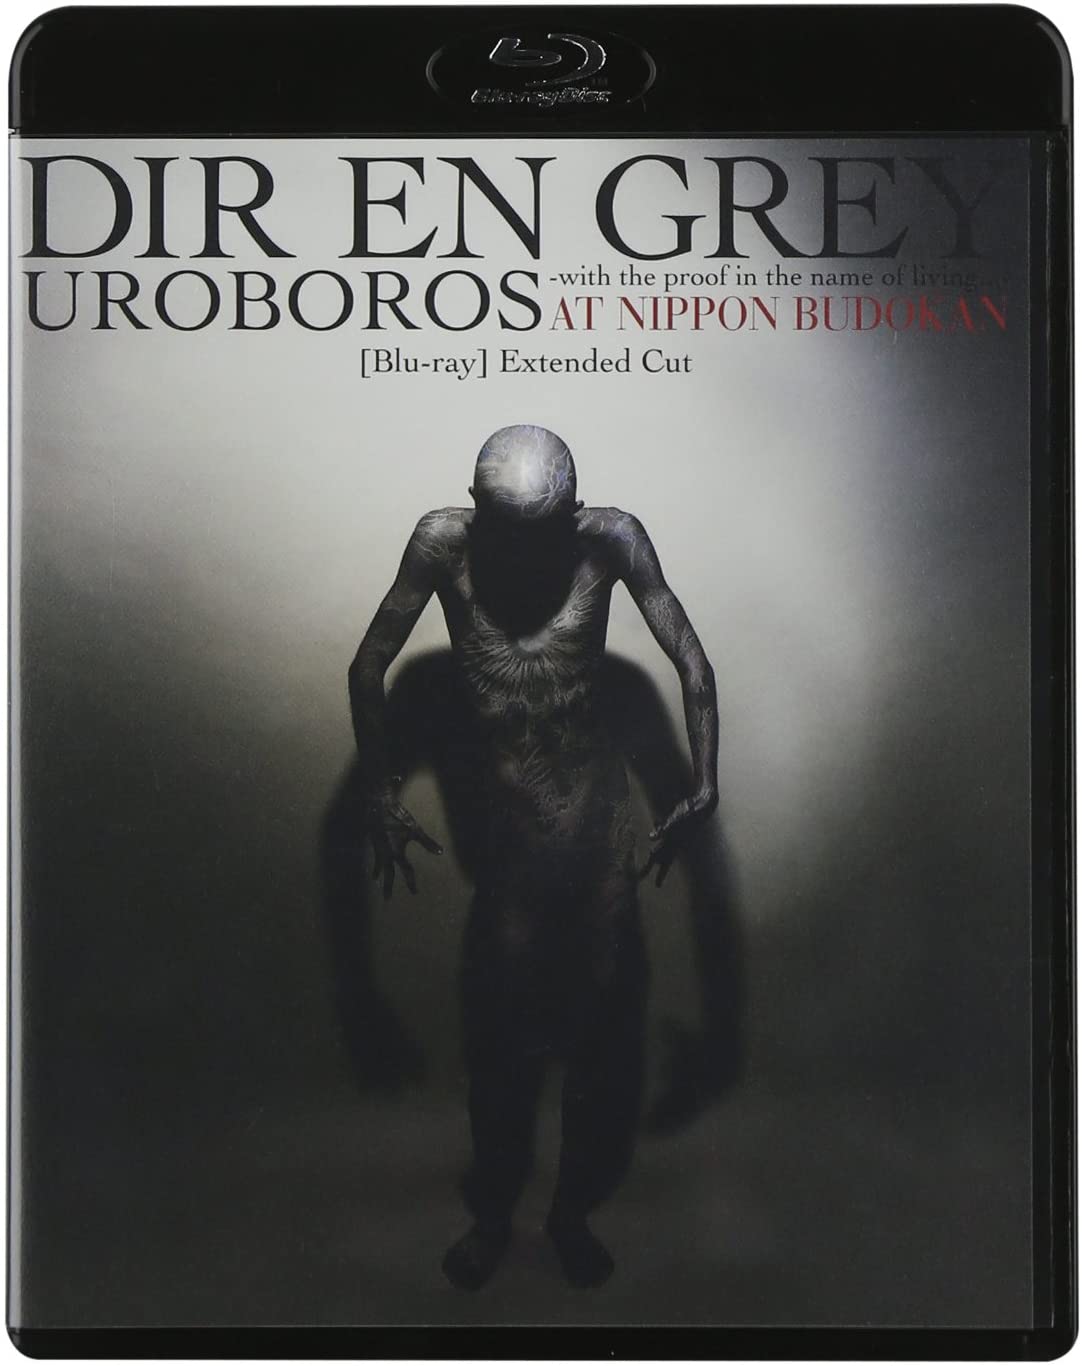 UROBOROS -with the proof in the name of living...-AT NIPPON BUDOKAN [Blu-ray] Extended Cut